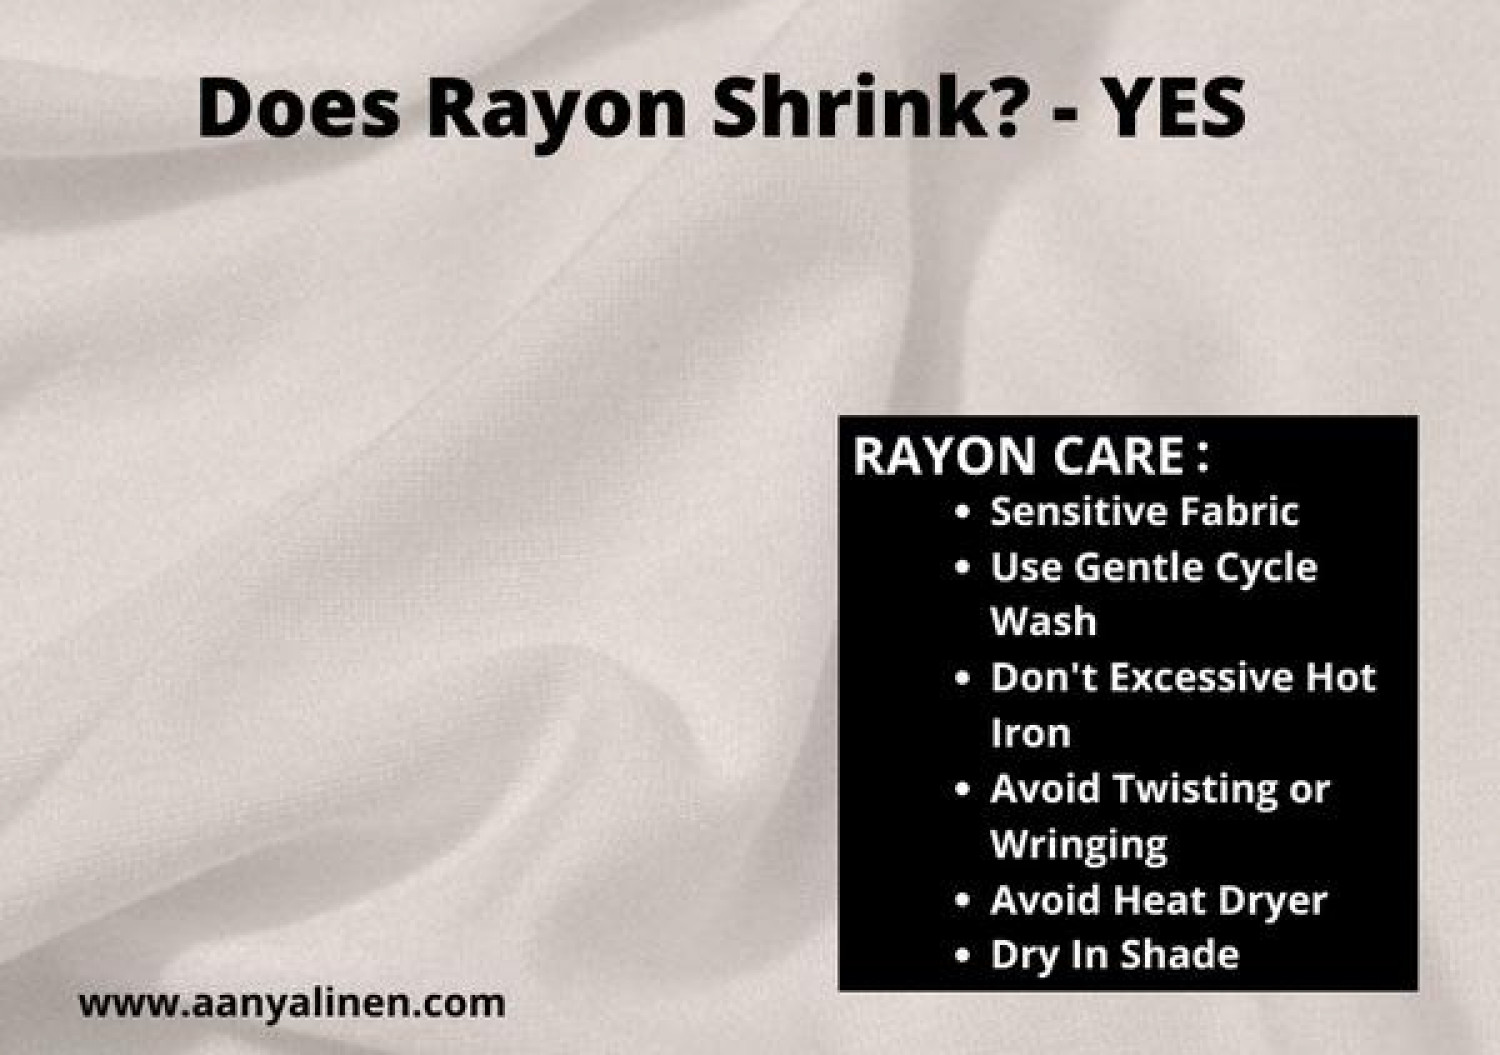 Does Rayon Shrink? Infographic